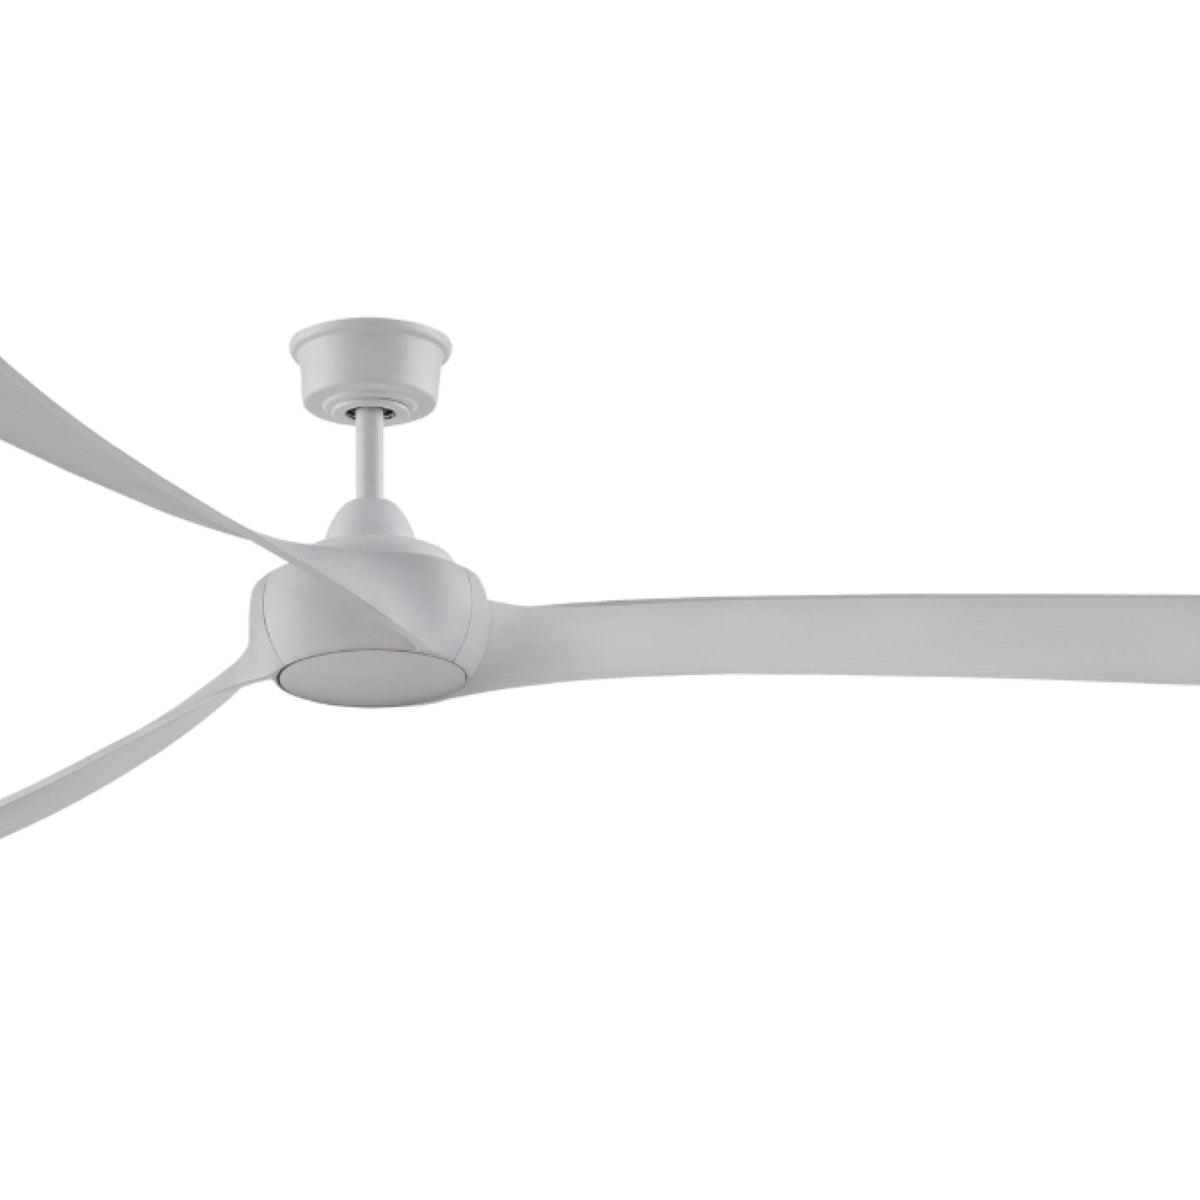 Wrap Custom Indoor/Outdoor Ceiling Fan Motor With Remote, Matte White Finish, 64-84" Blades Sold Separately - Bees Lighting